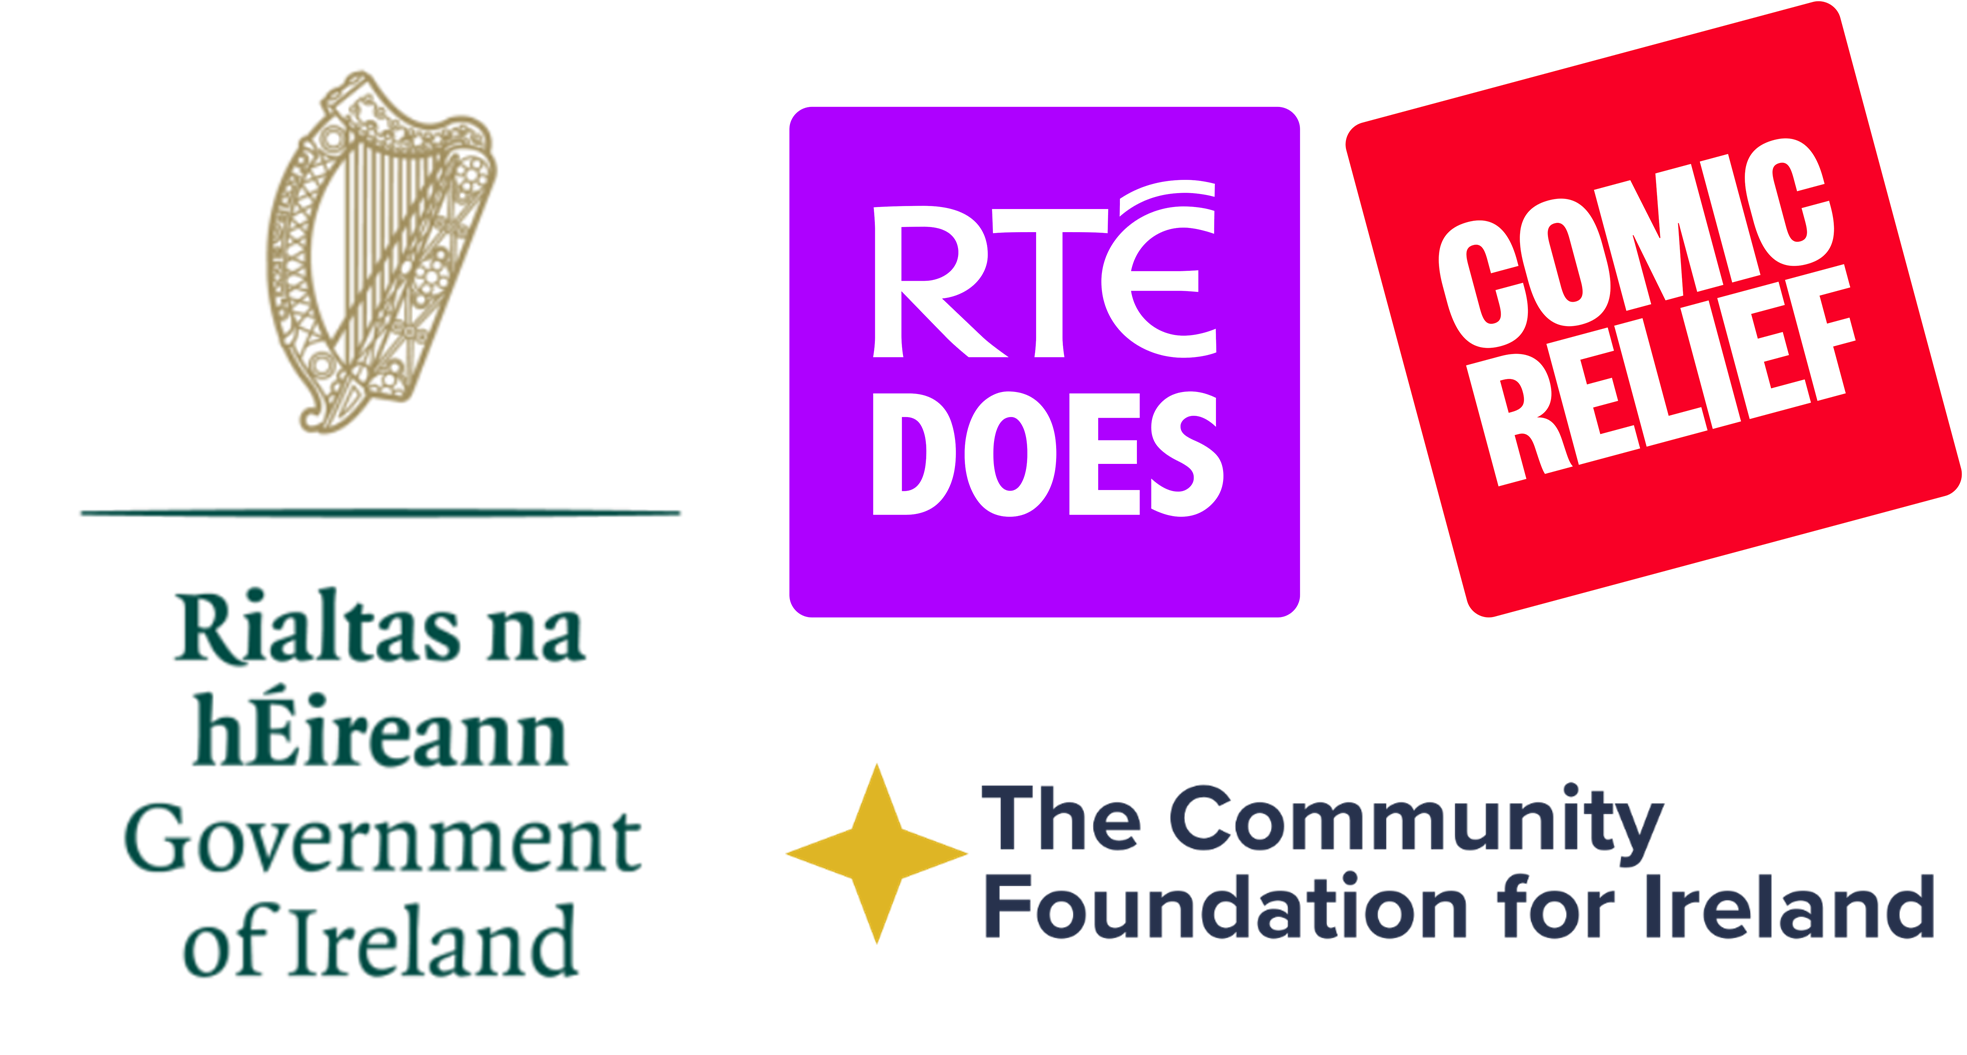 Preparing for Life Awarded RTE does Comic Relief Grants